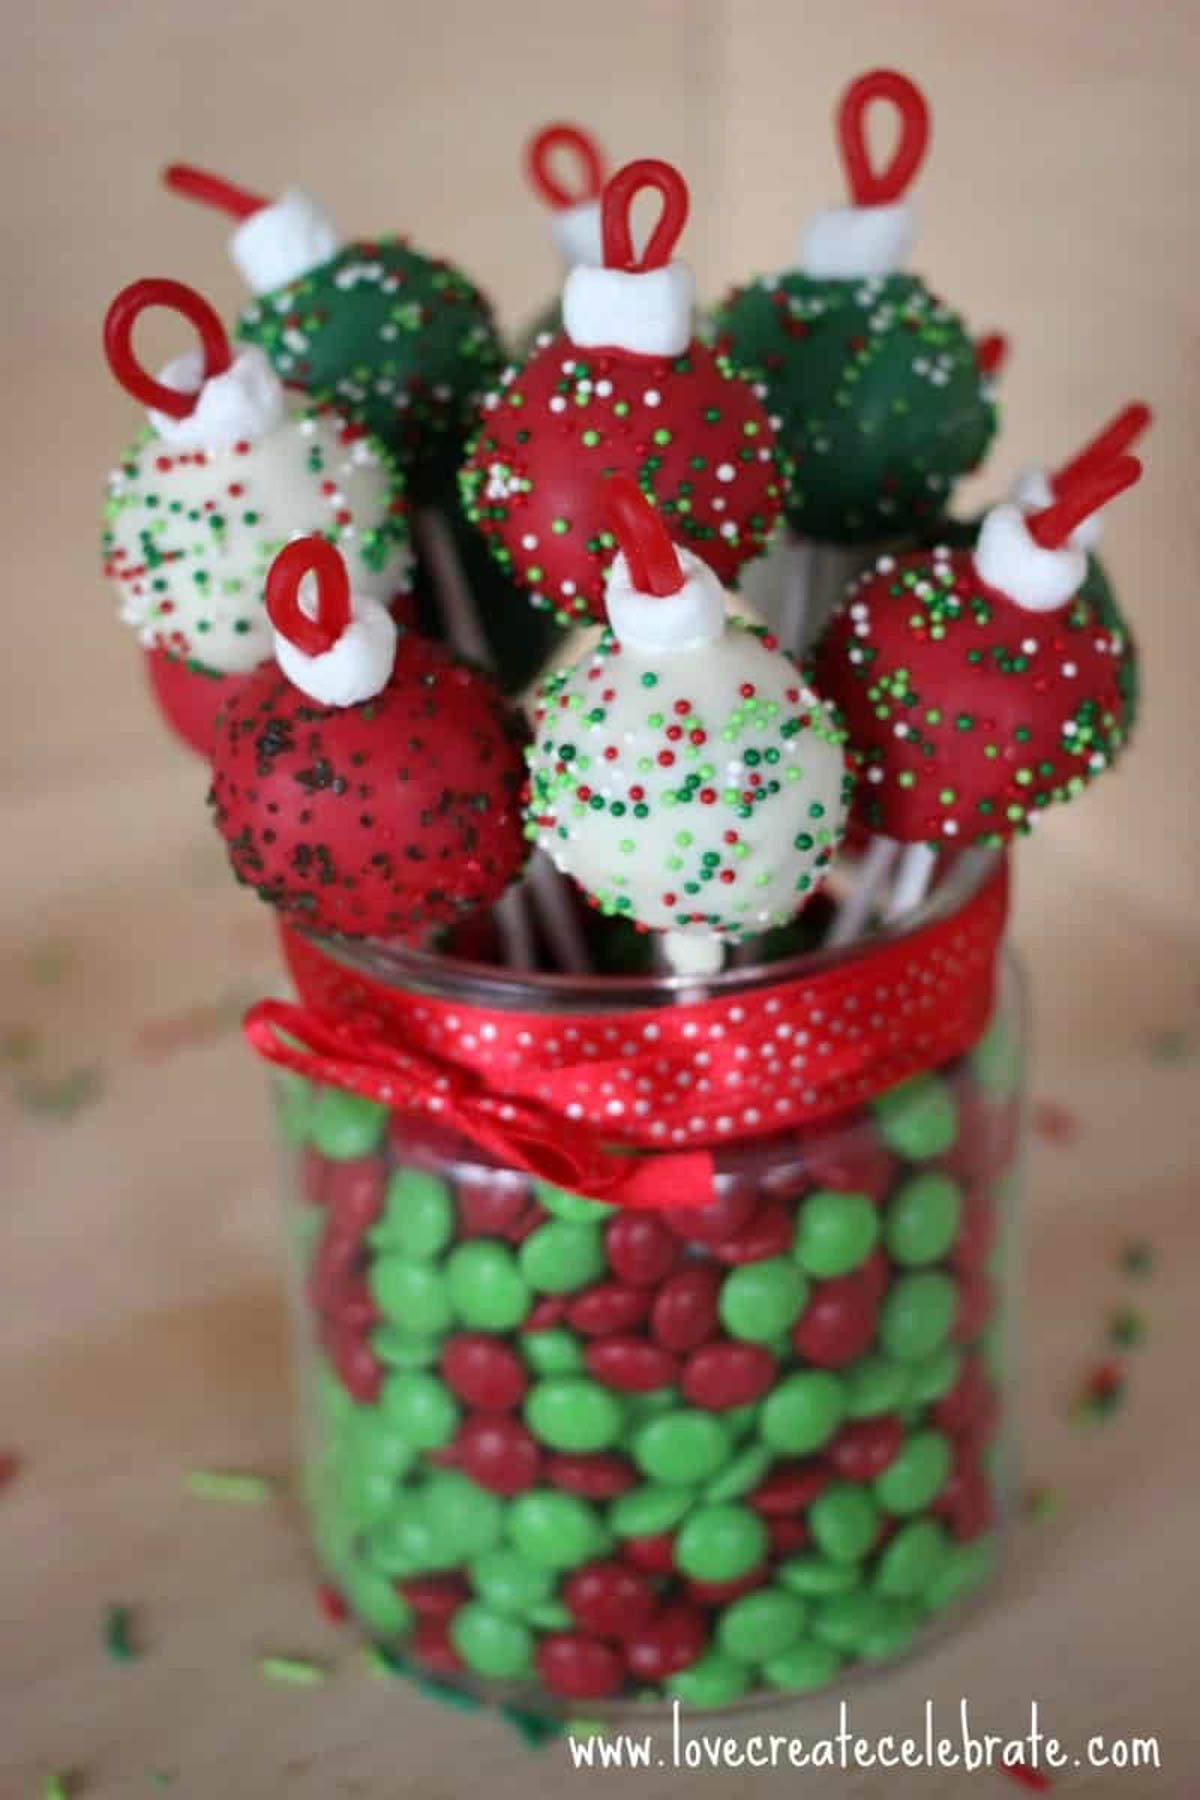 Red, green, and white ornament cake pops in a jar of red and green m&m's.